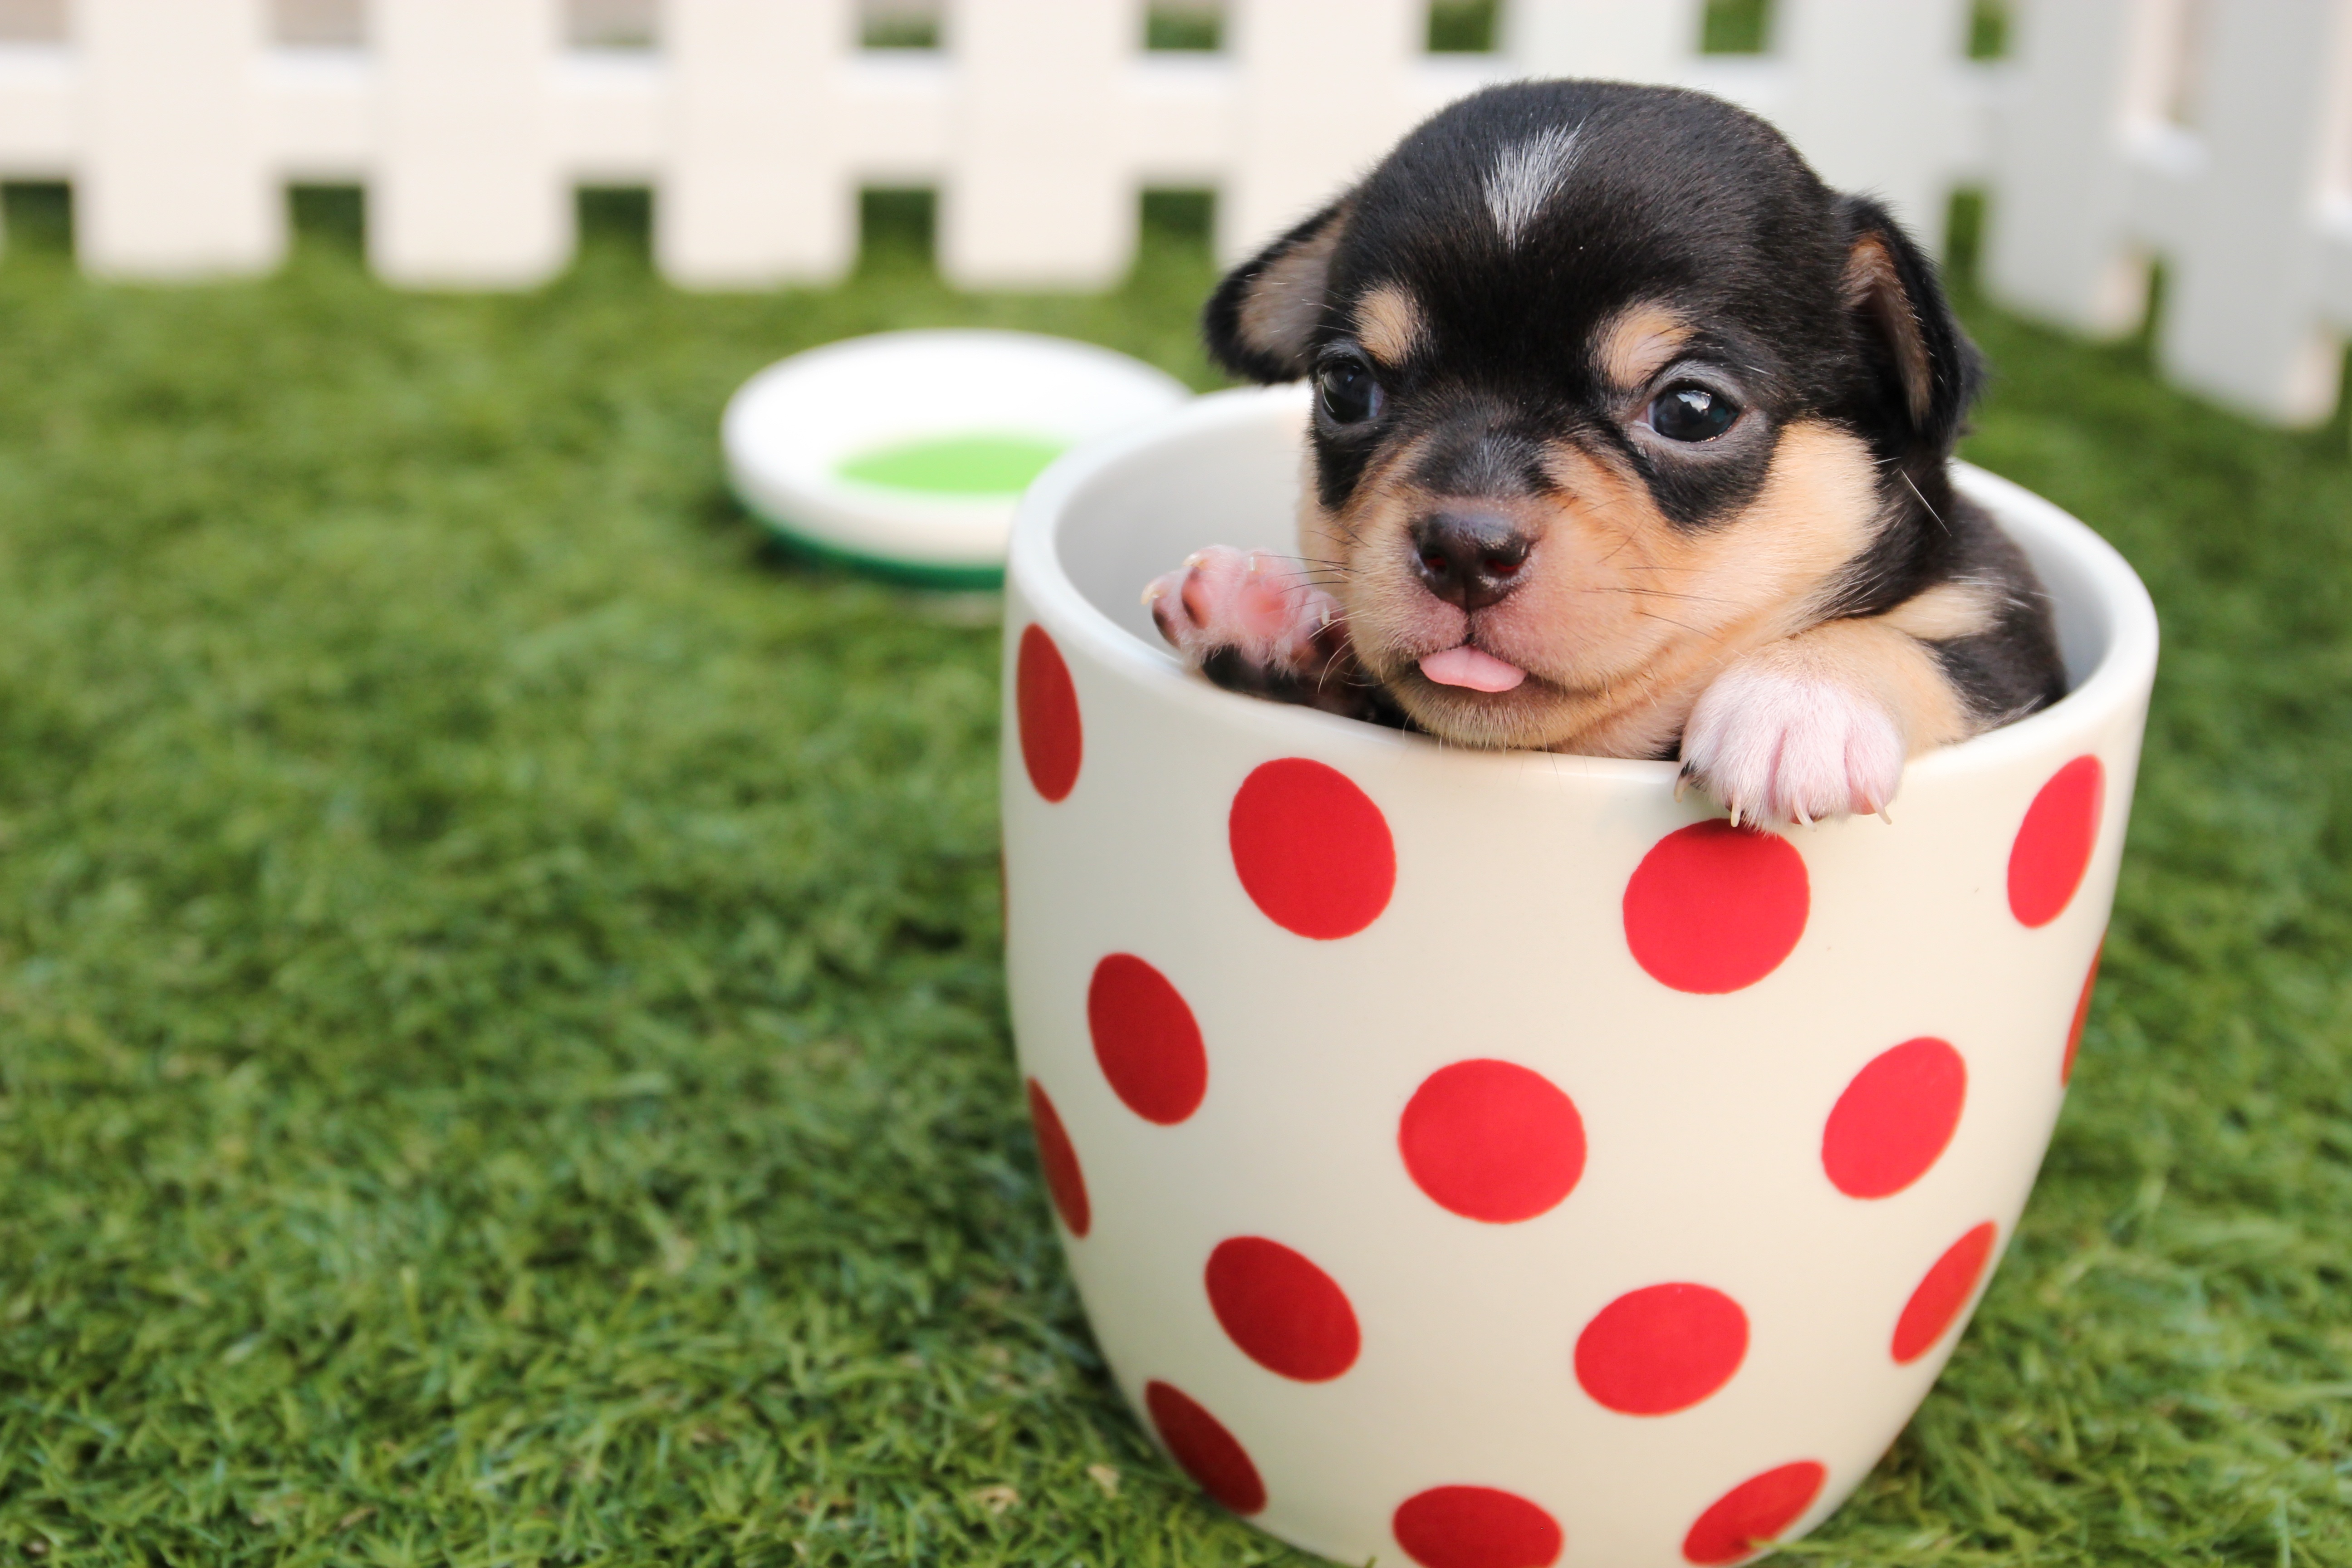 73496 download wallpaper dog, animals, cup, puppy screensavers and pictures for free